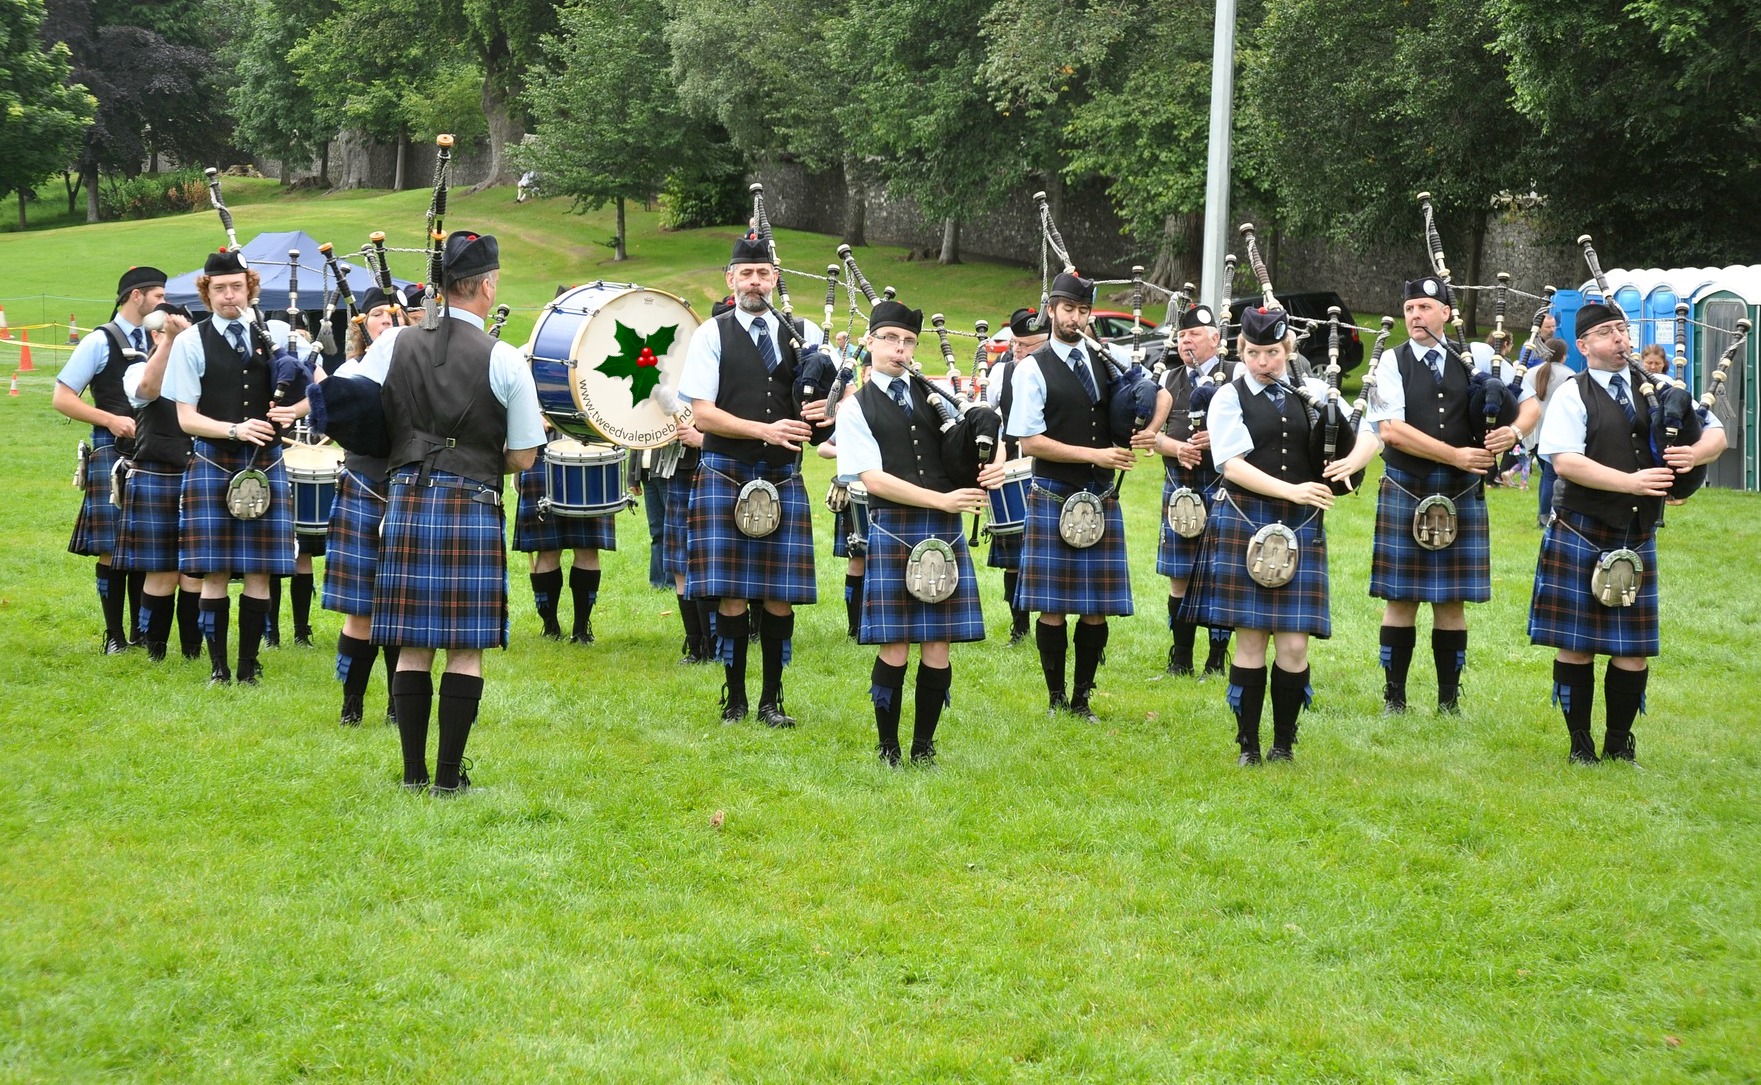 Some pipers piping